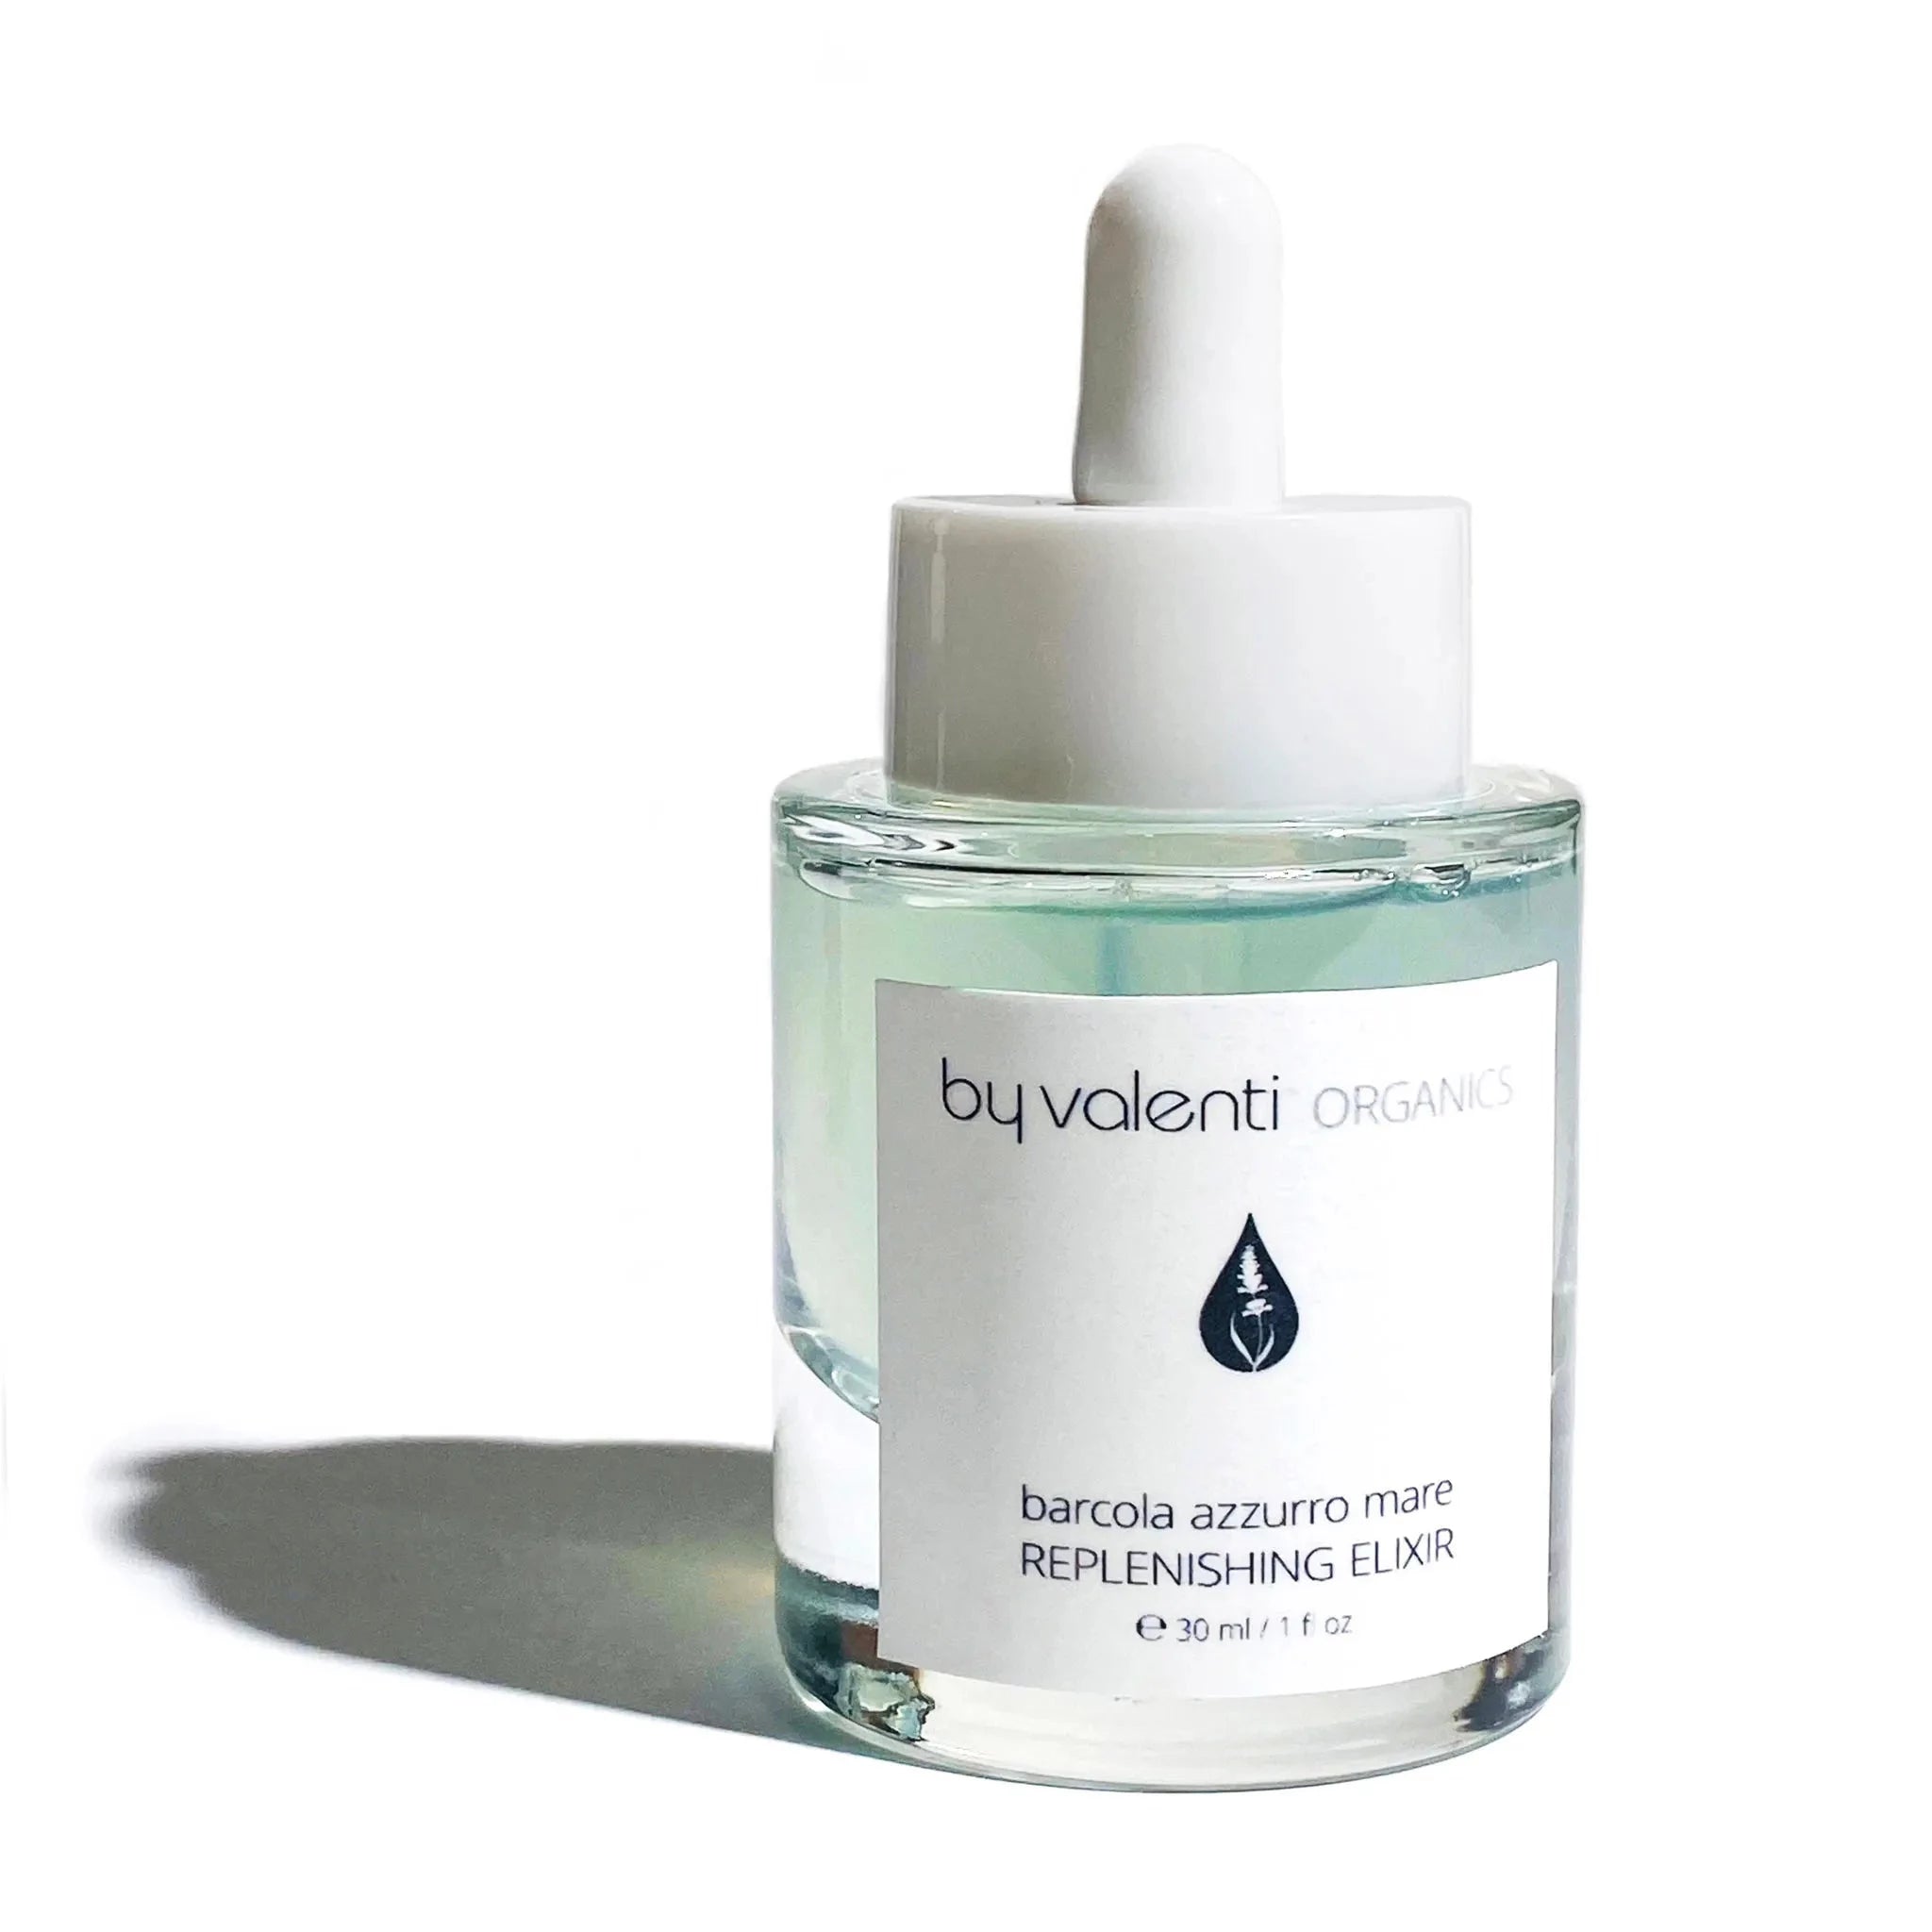 Barcola Azzurro Mare Replenishing Elixir with Hyaluronic Acid and NiacinamideBy Valenti Organics Clean Natural Skincare